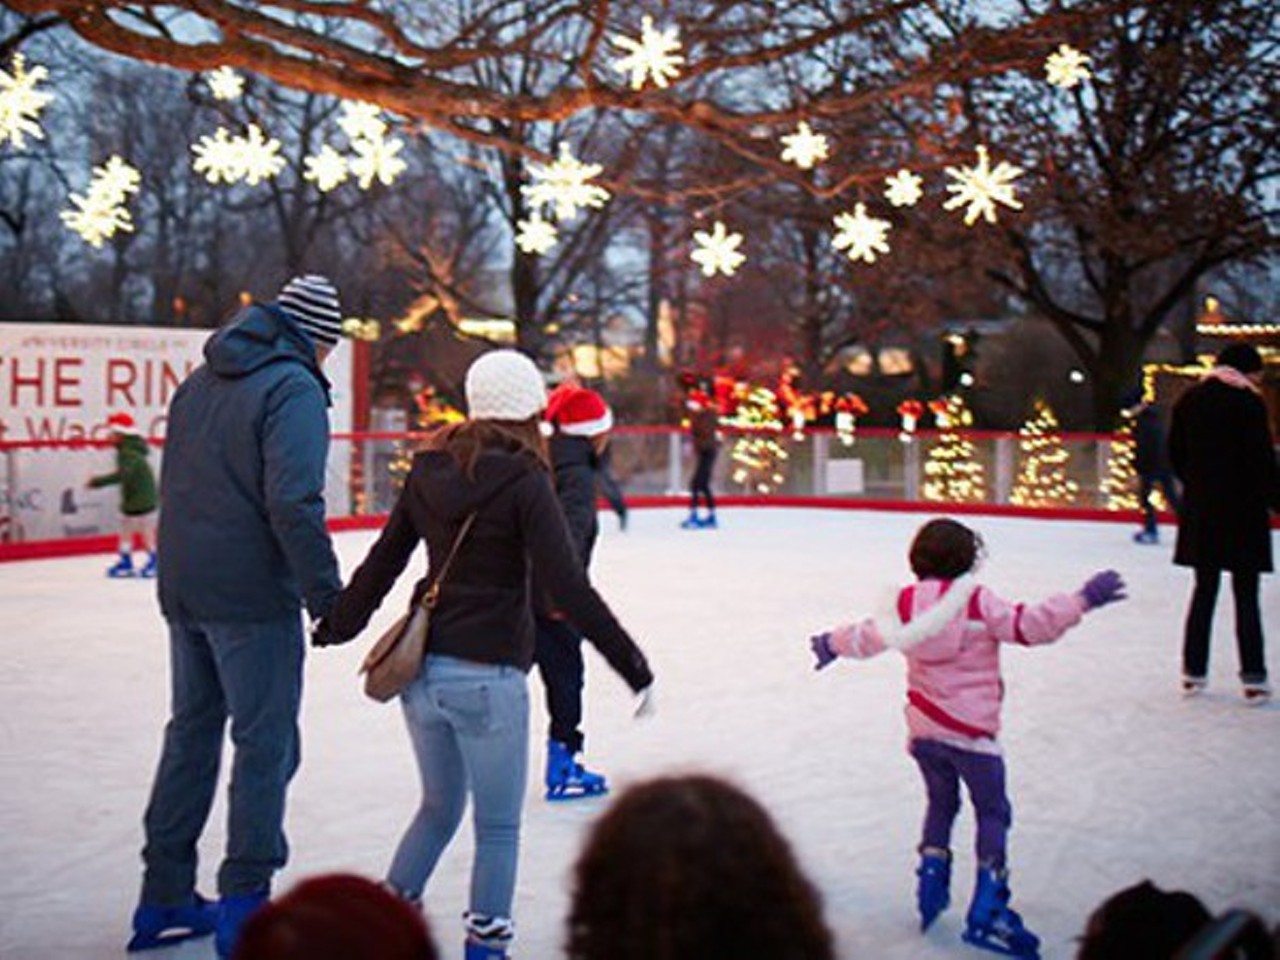  Ice Skating At Wade Oval
Relive the glory days of your ice skating youth, take the family or hold the hand of your date, strap on the skates and do your best Olympics audition: The rink at Wade Oval is all purpose and the perfect outdoor activity that takes just a modicum of actual athleticism and coordination. Two bucks to skate, $3 for skate rentals, and the rink is open Fridays, Saturdays and Sundays through Feb. 17 with additional days between Christmas and New Year's. 
Photo via Scene Archives